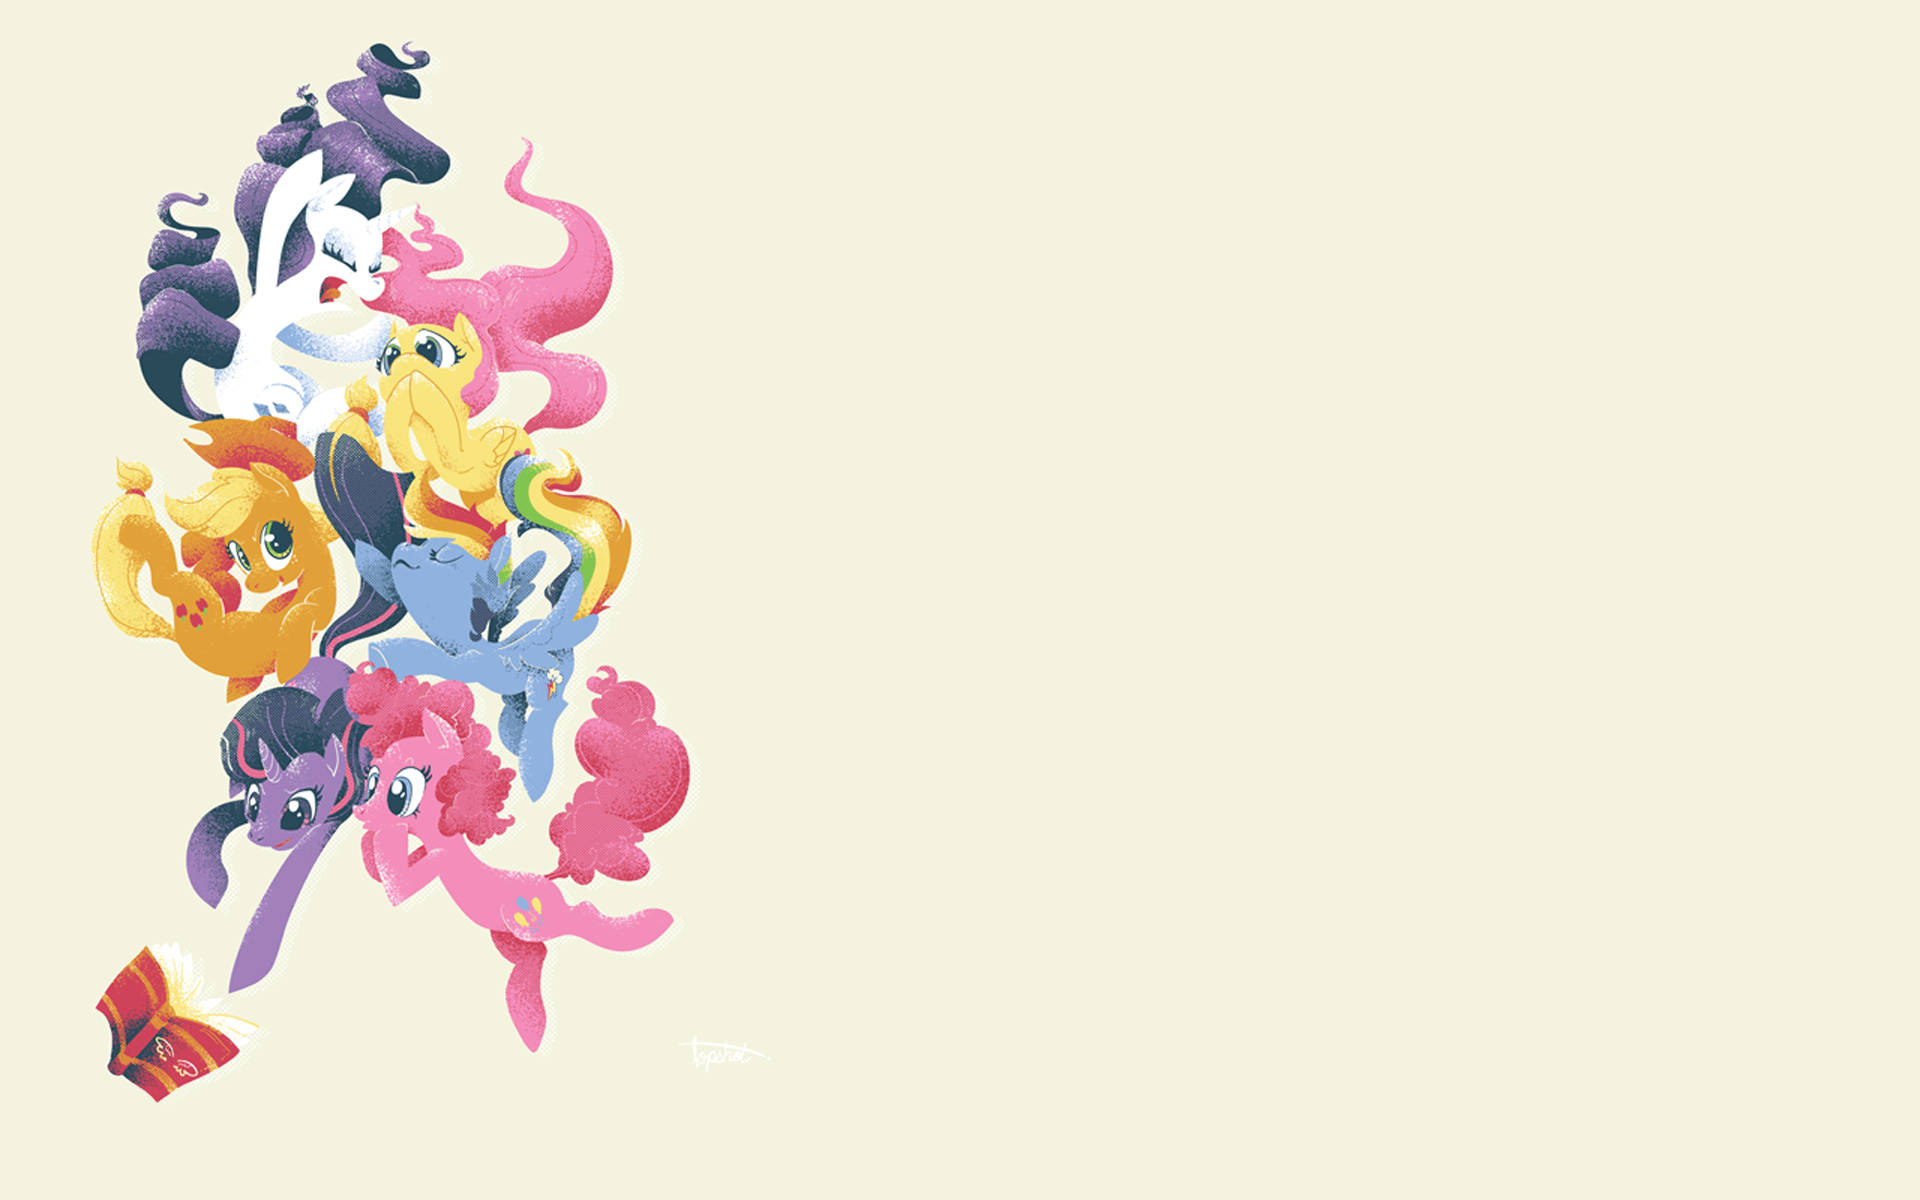 100+] My Little Pony Wallpapers for FREE 